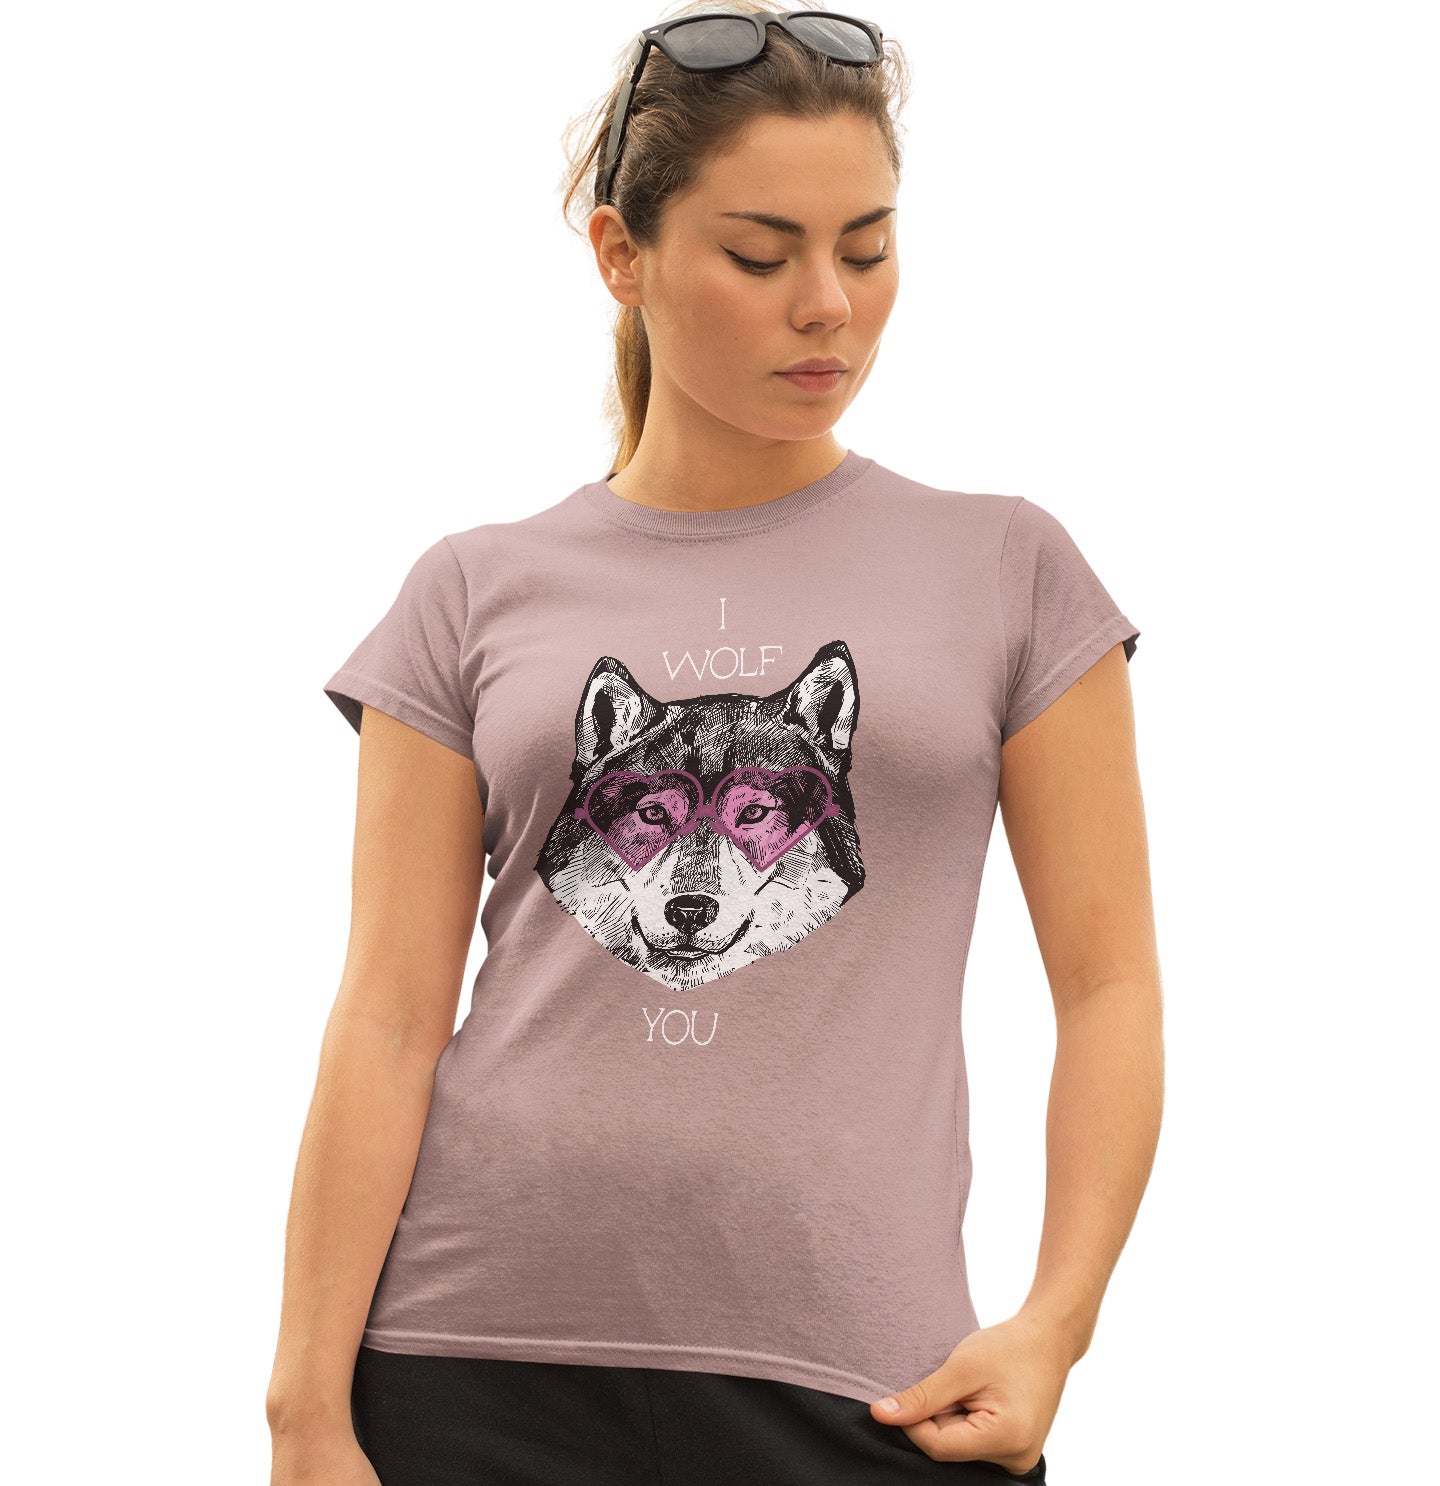 Animal Pride - I Wolf You - Women's Fitted T-Shirt